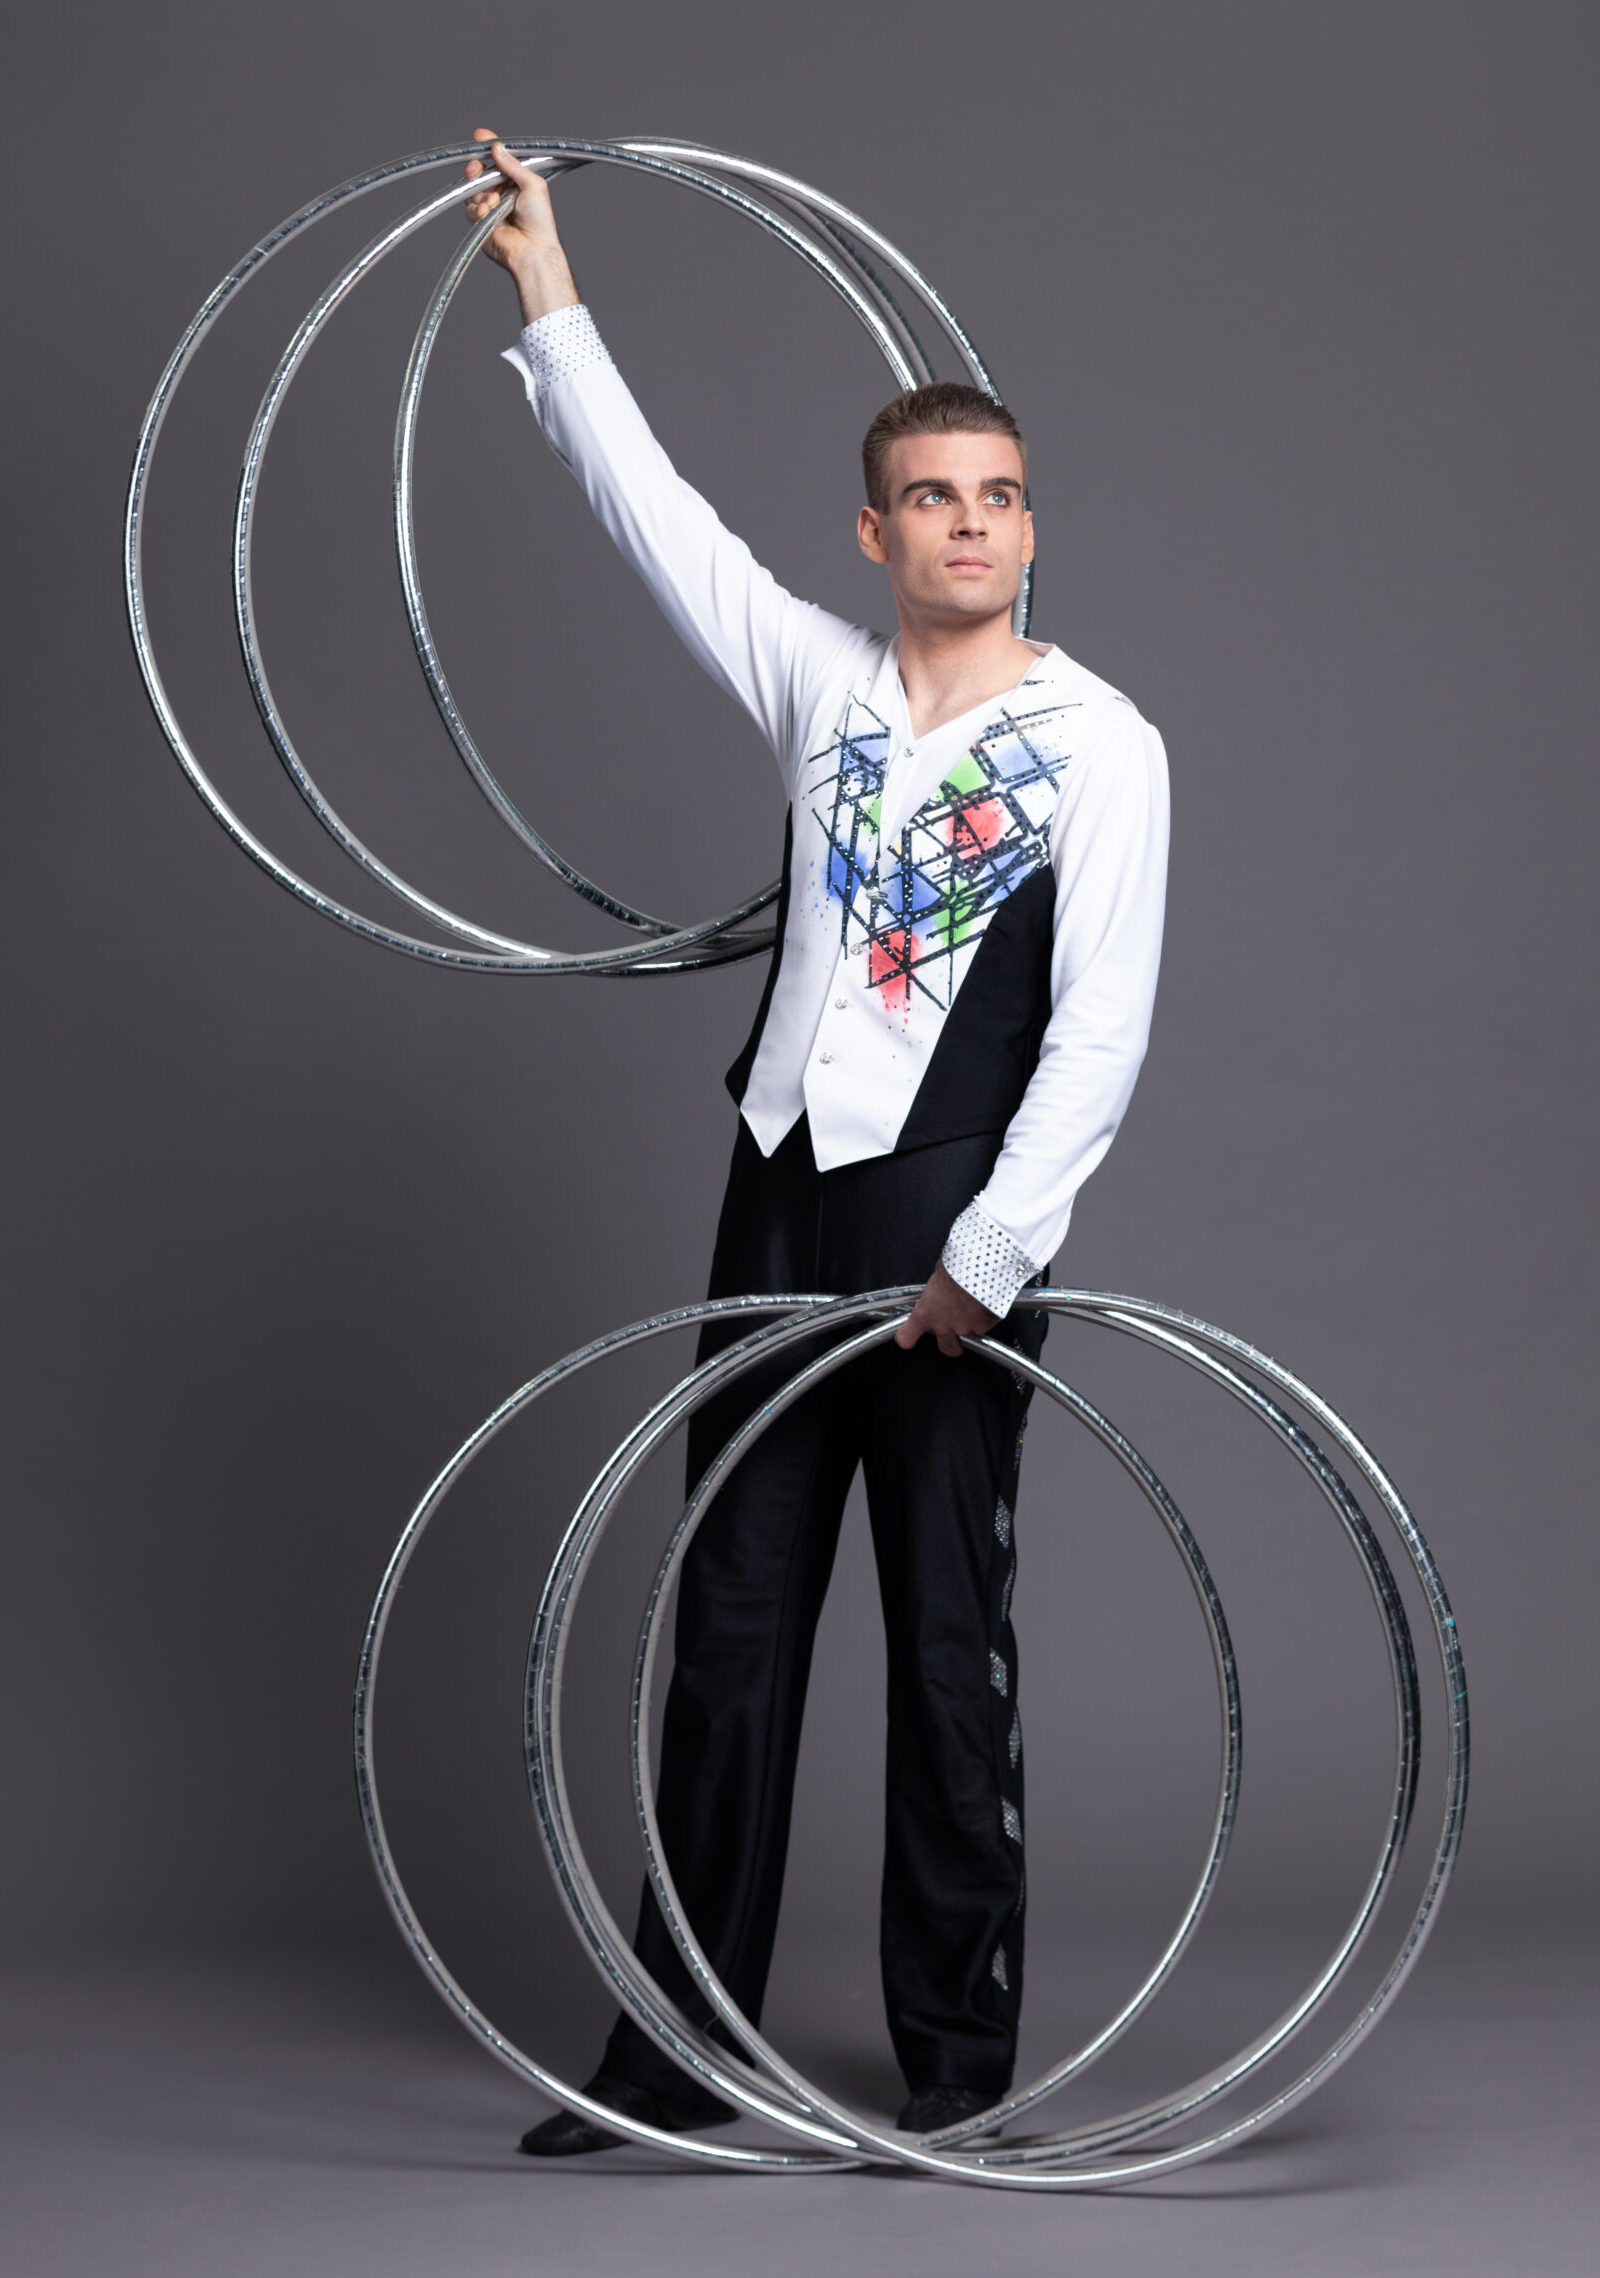 His domain is hula hoop artistry. And he masters it with great virtuosity. 